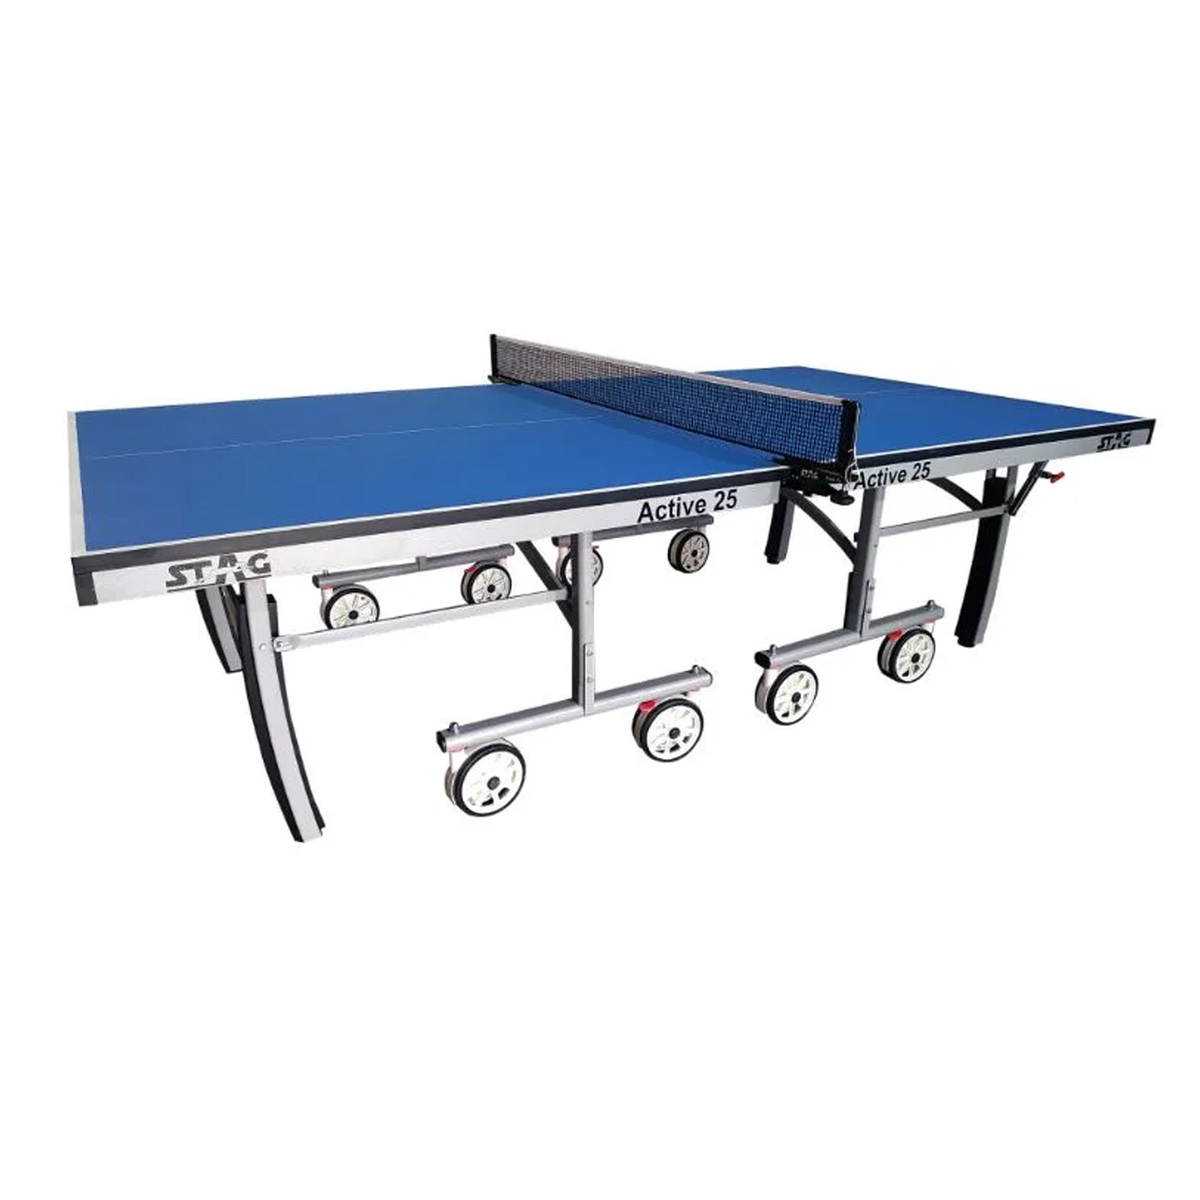 Stag Table Tennis Table, ACTIVE-25D